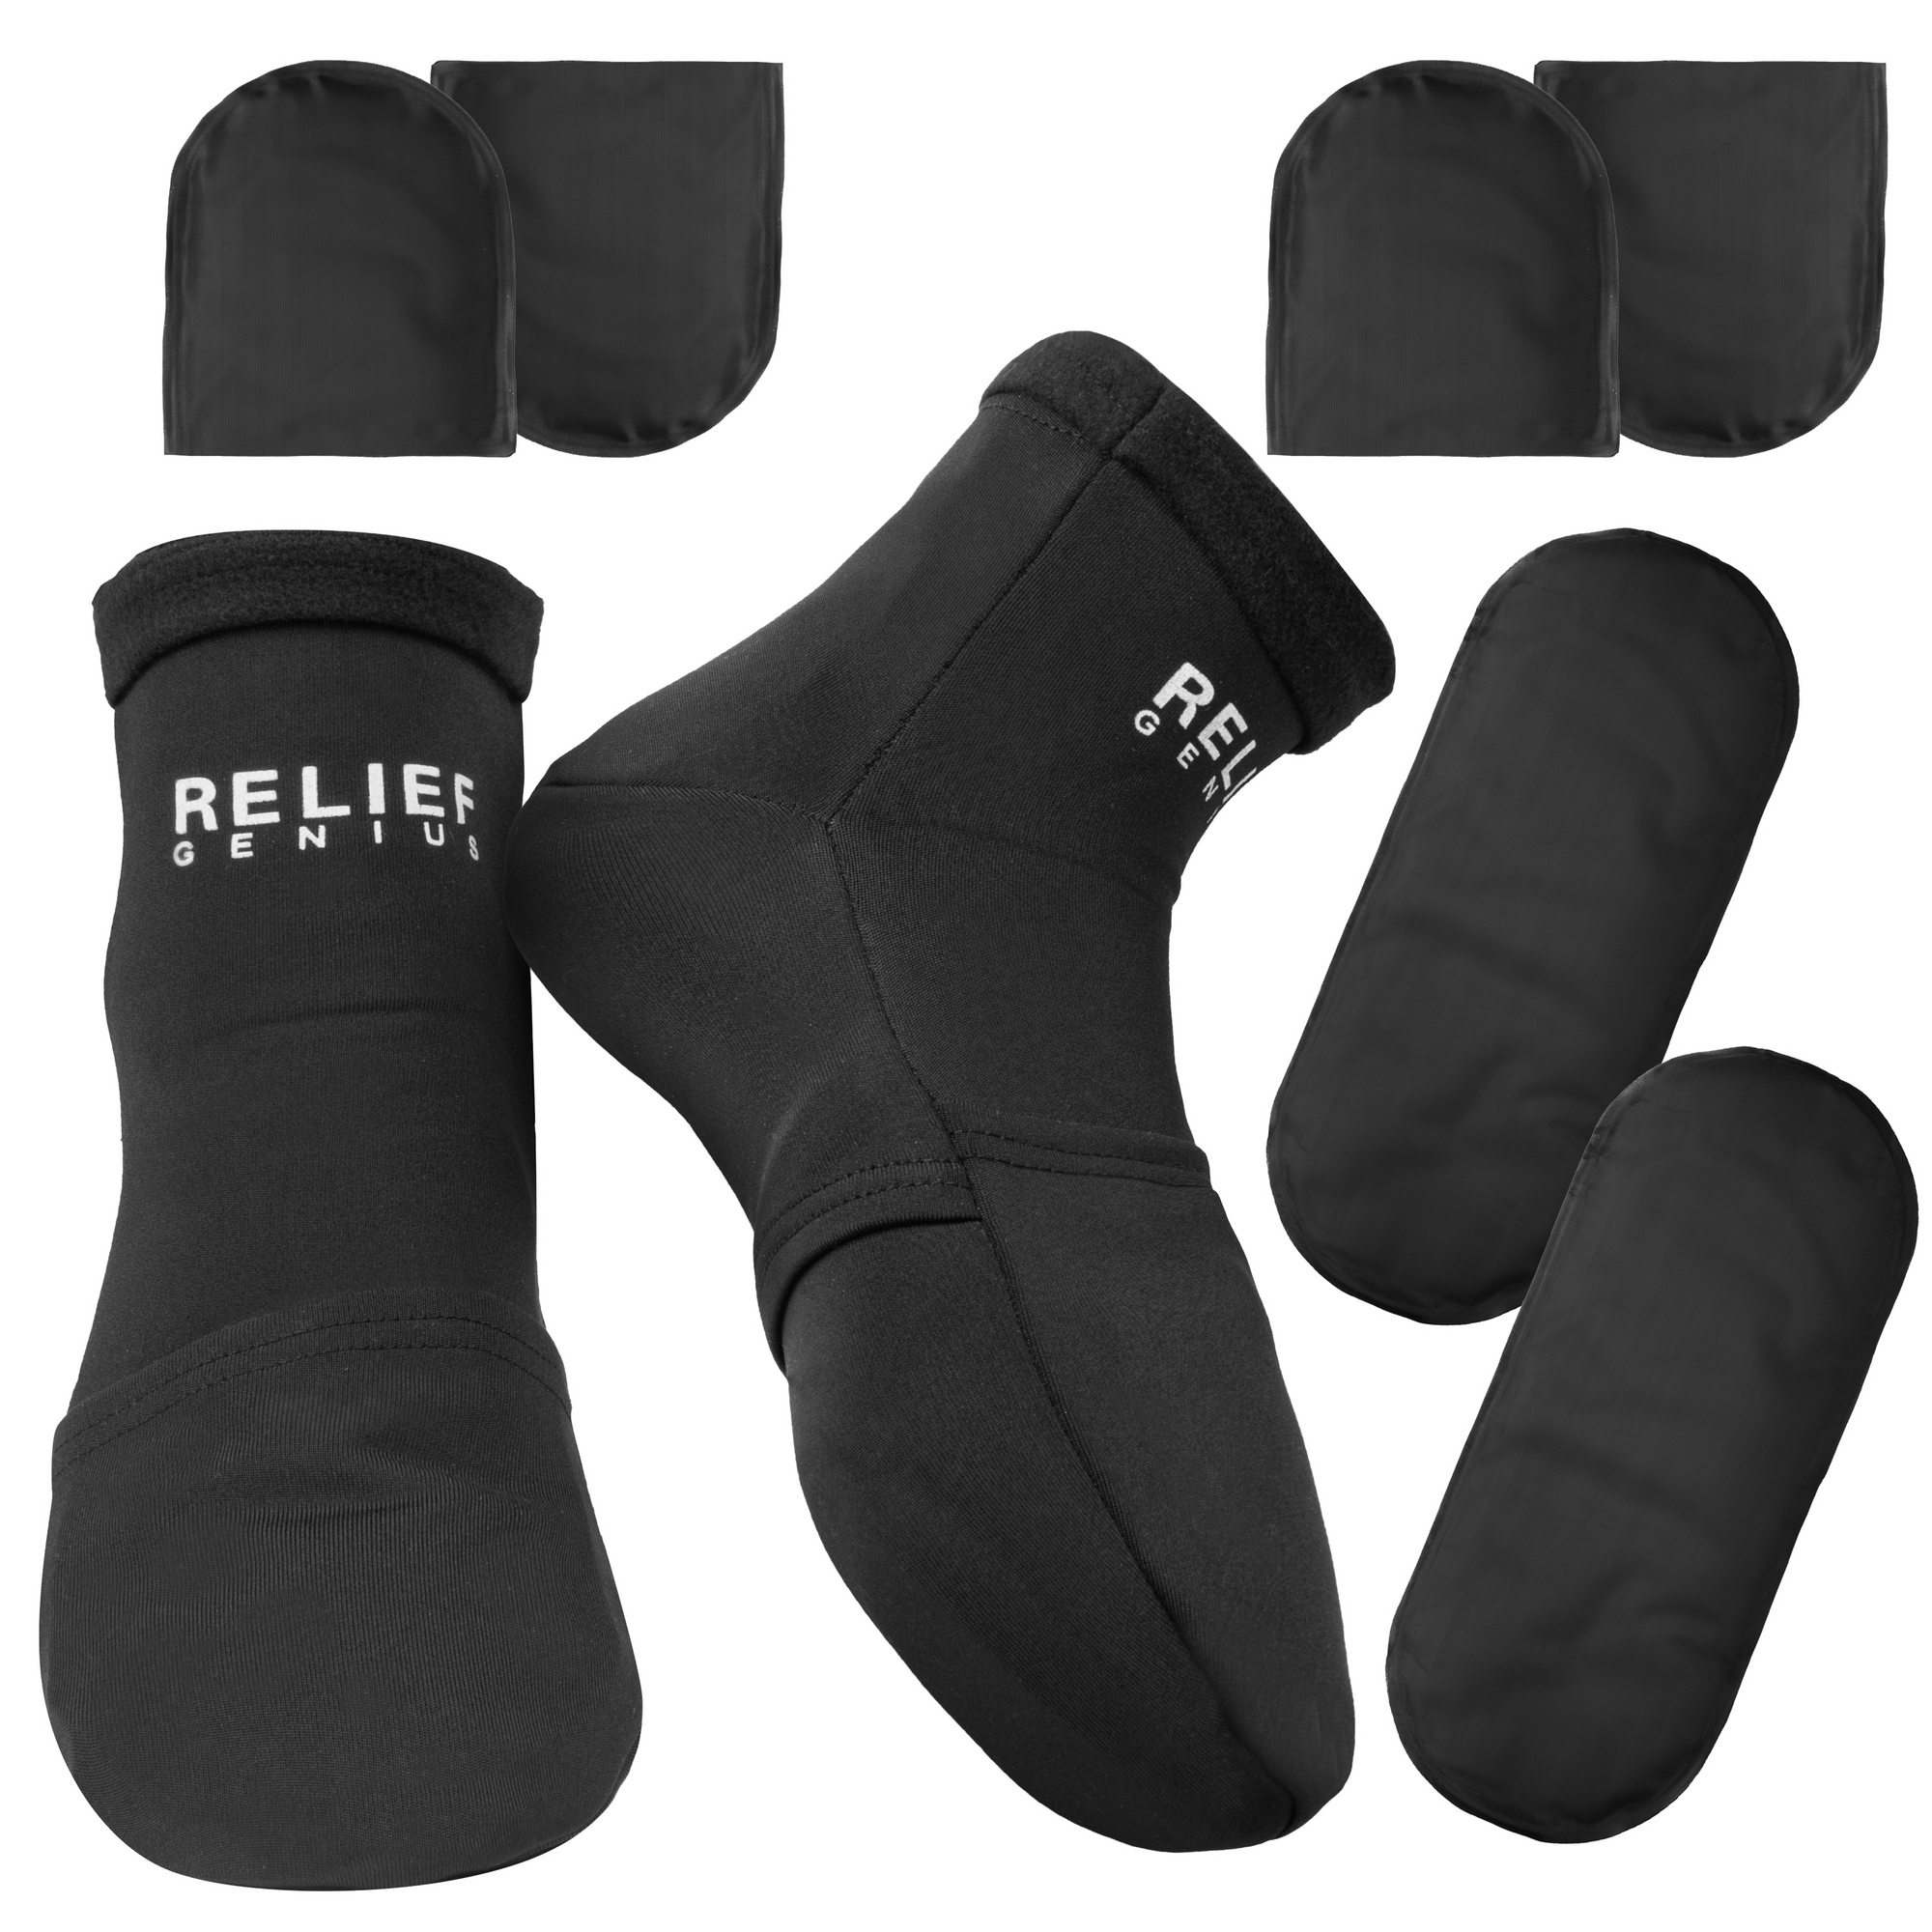 Large Socks with 2 replacement packs bundle